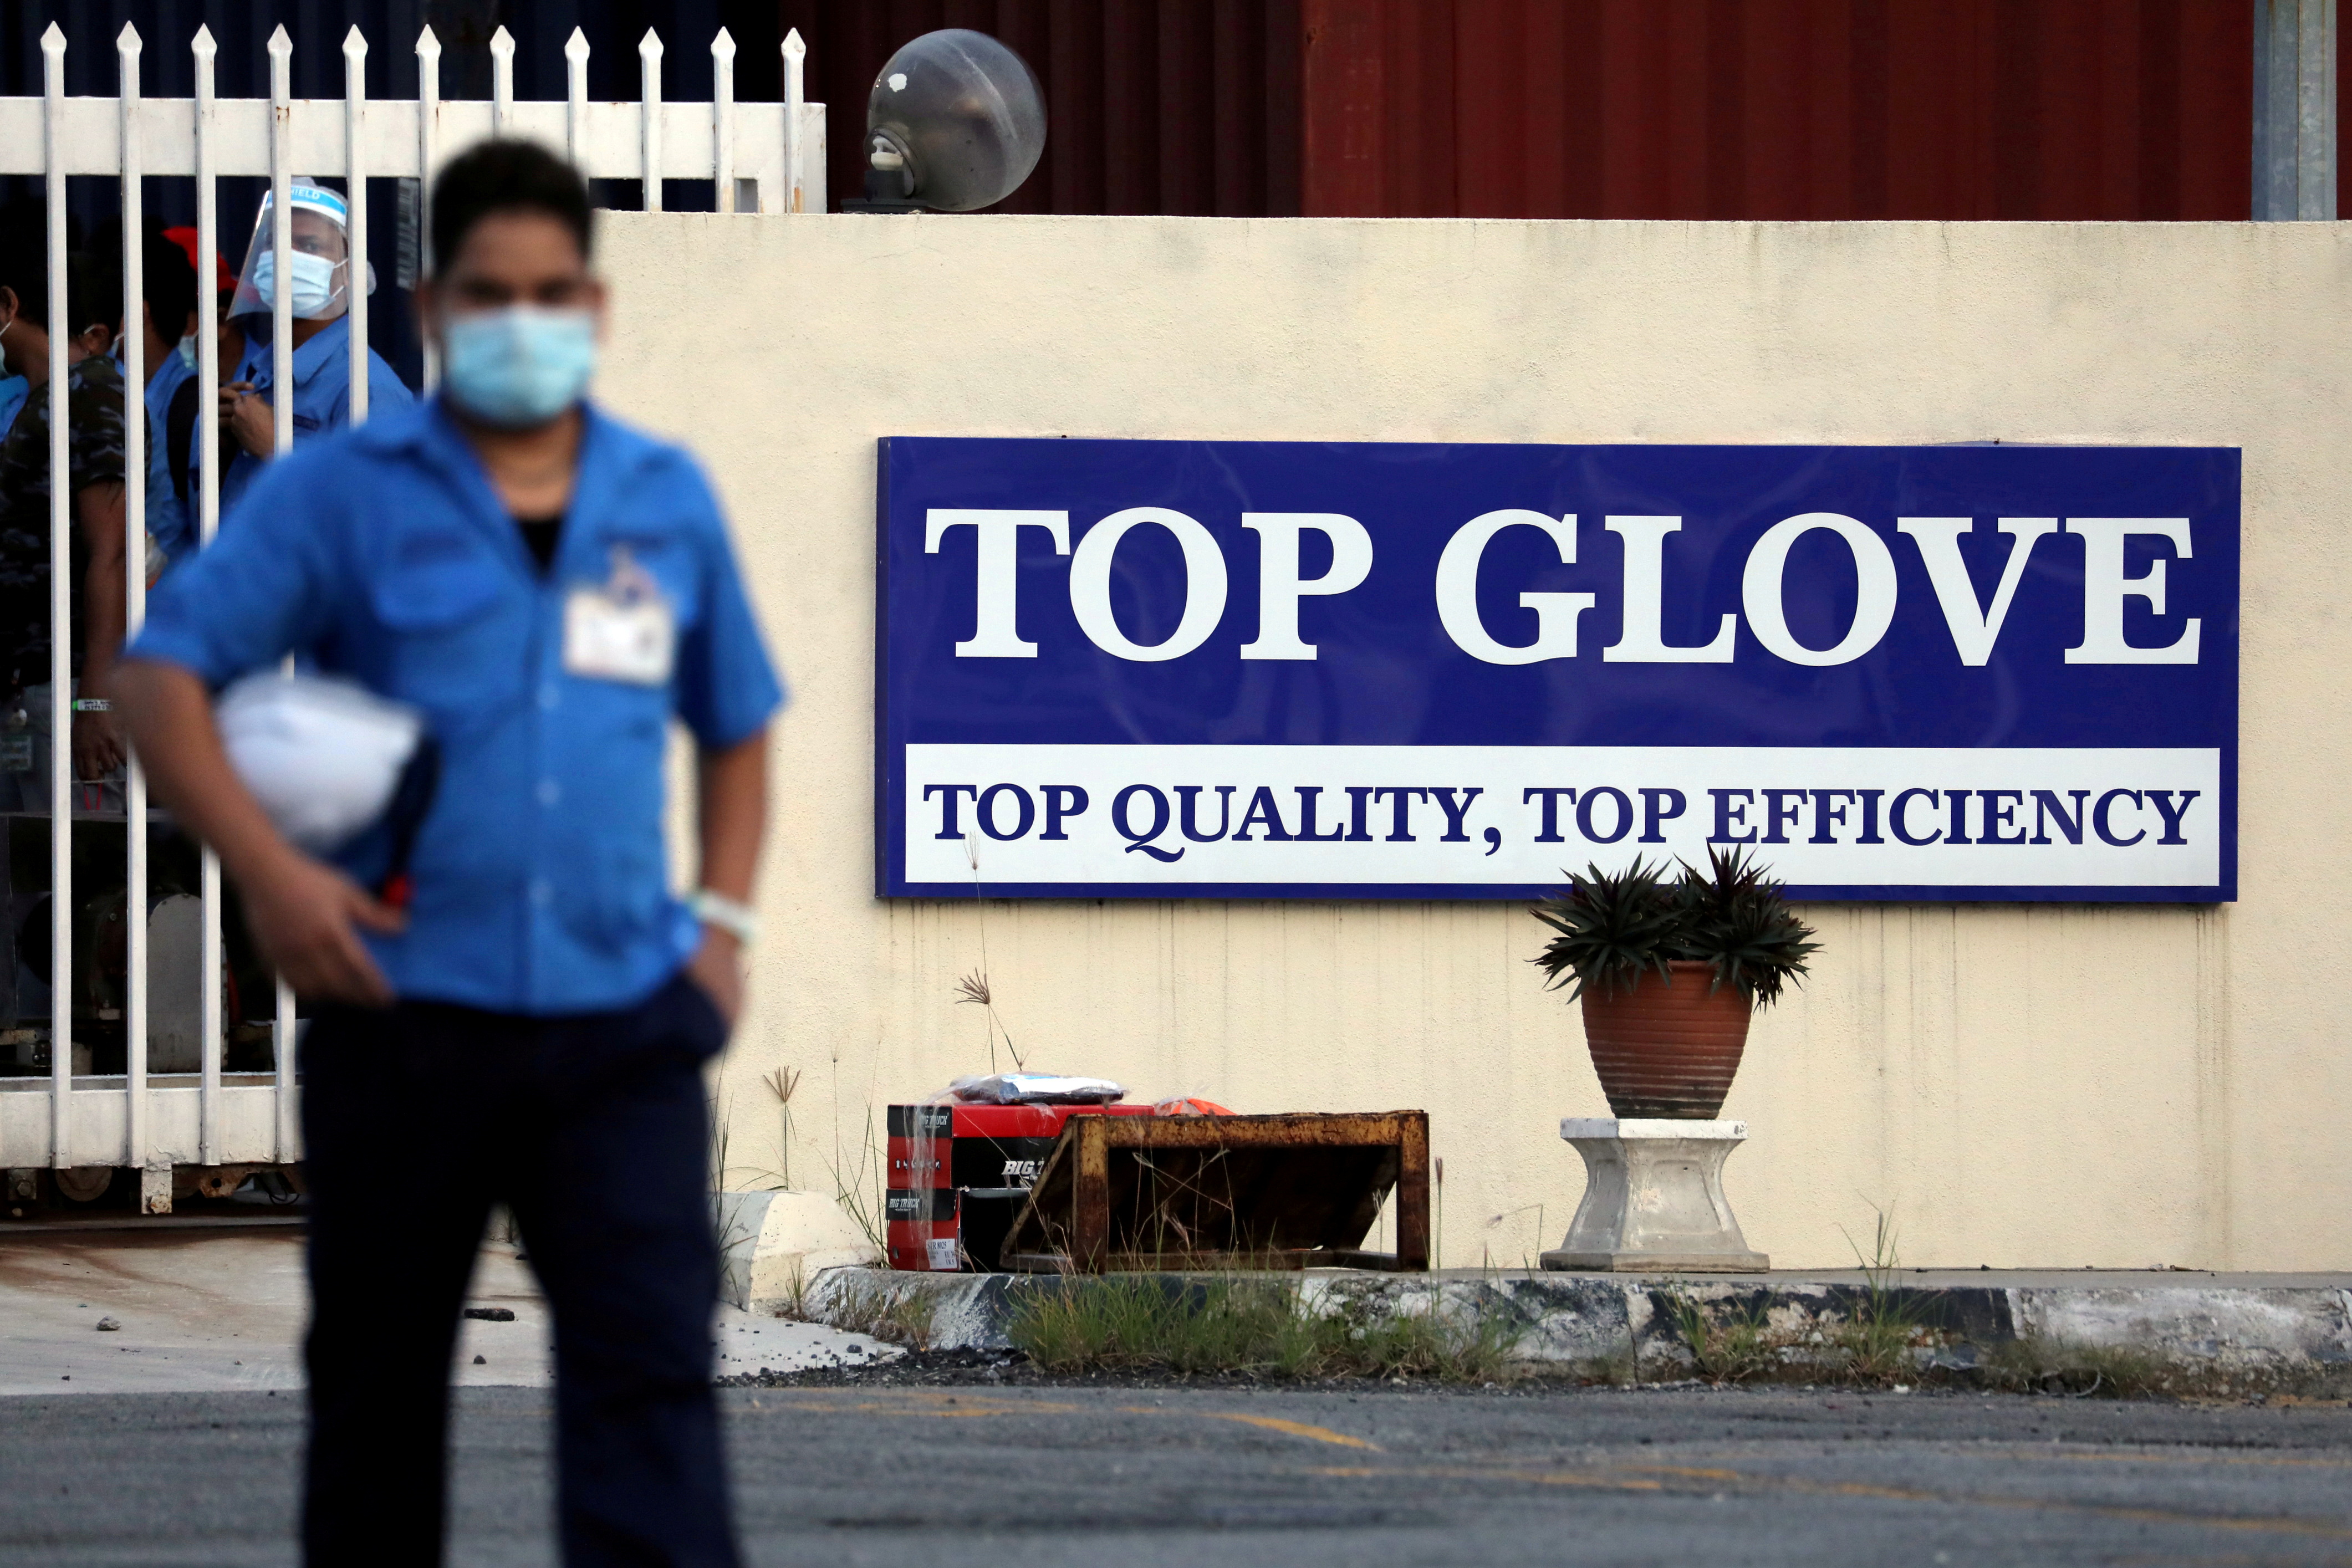 A worker leaves a Top Glove factory after his shift in Klang, Malaysia Dec. 7, 2020. REUTERS/Lim Huey Teng